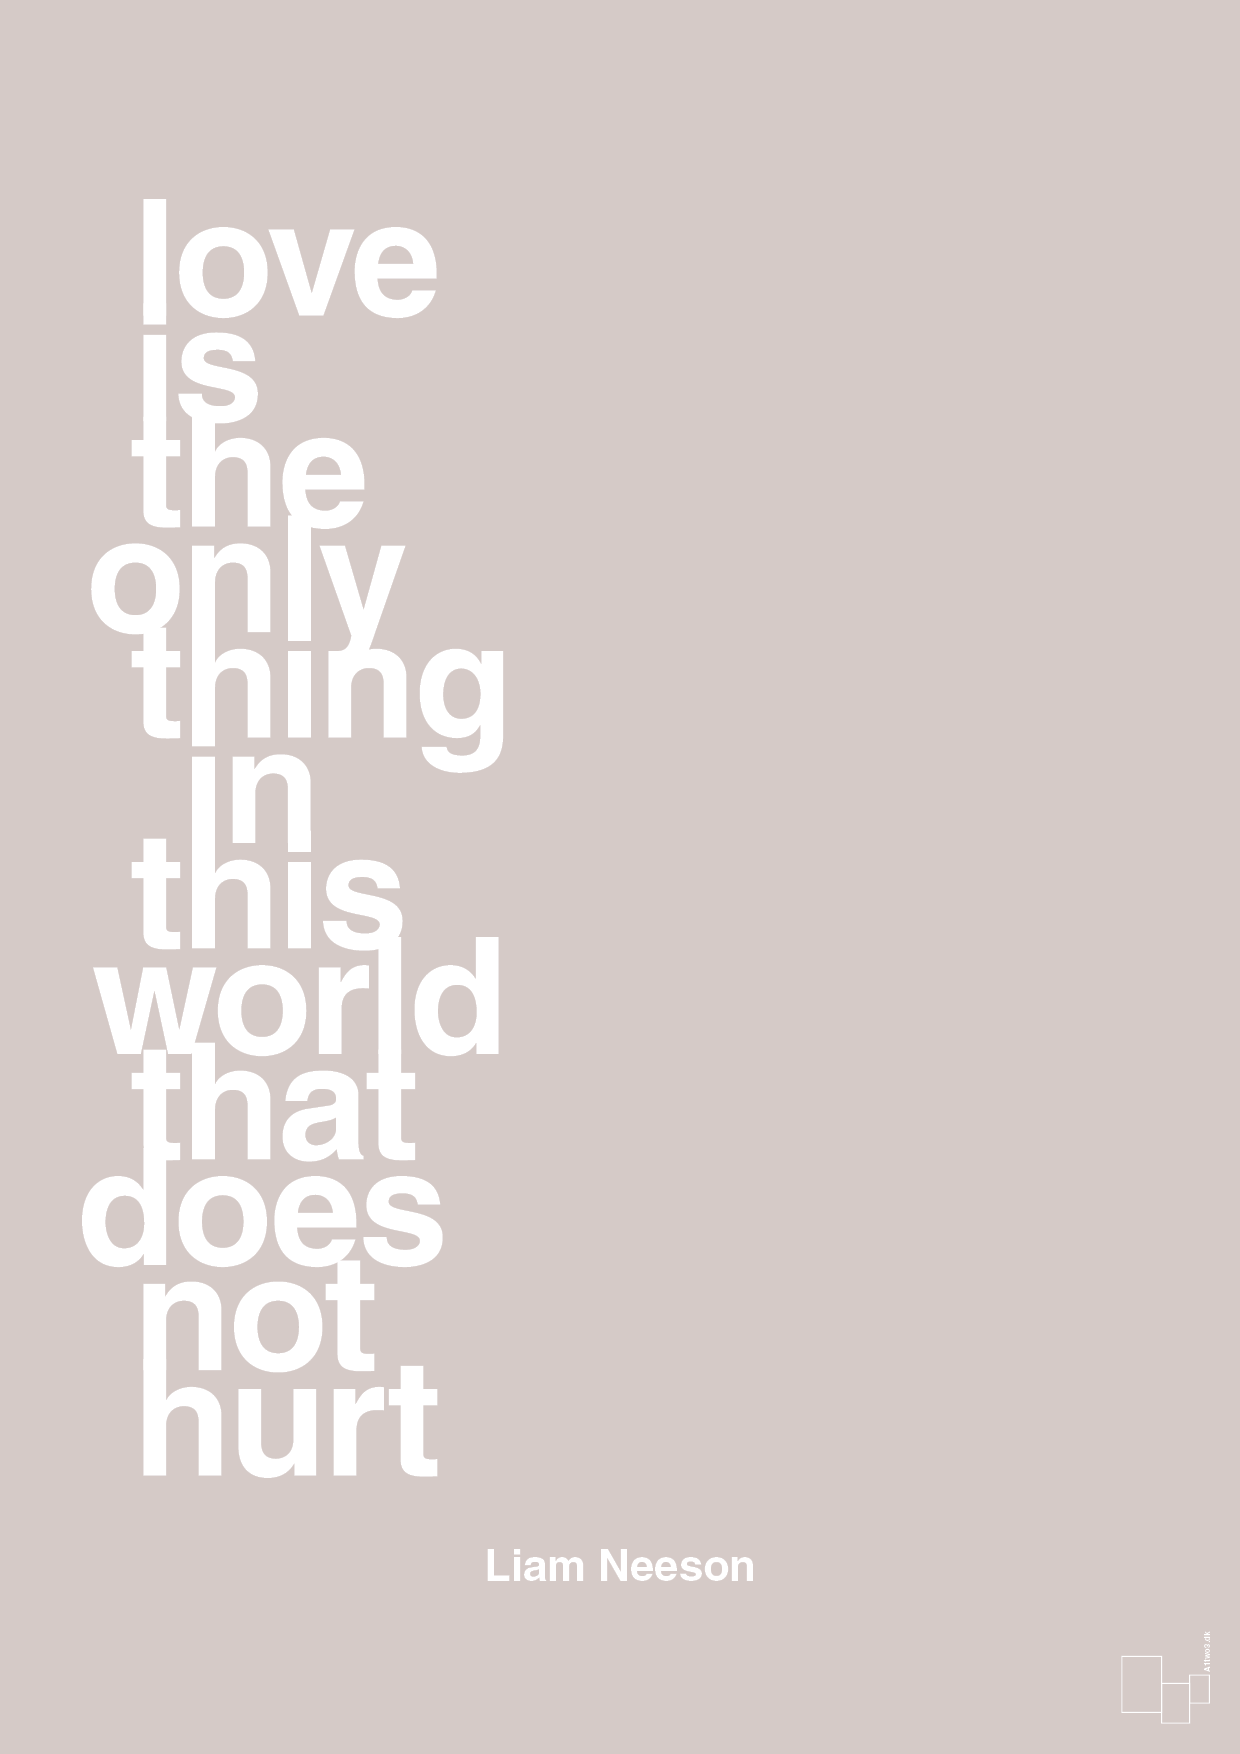 love is the only thing in this world that does not hurt - Plakat med Citater i Broken Beige